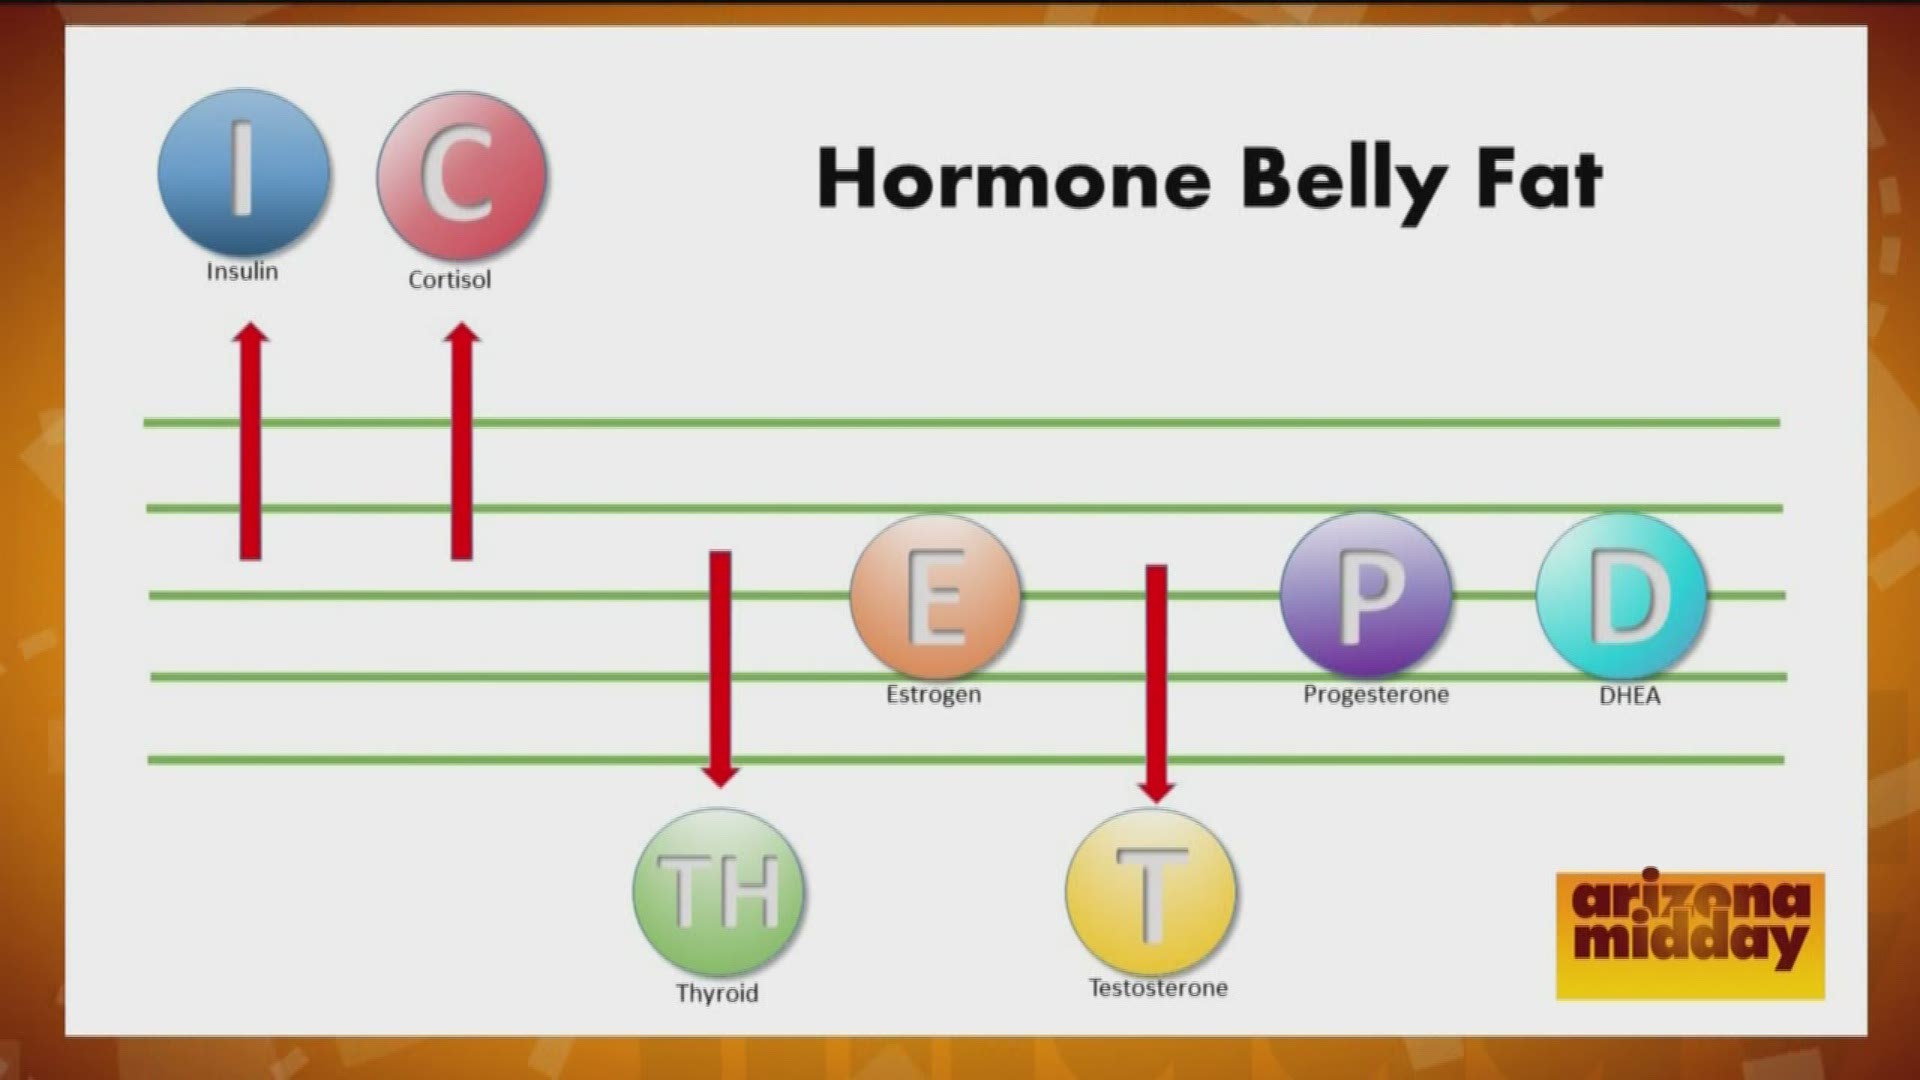 Jacqueline Olson from EnvoqueMD explains how hormone therapy can help get rid of that stubborn belly fat